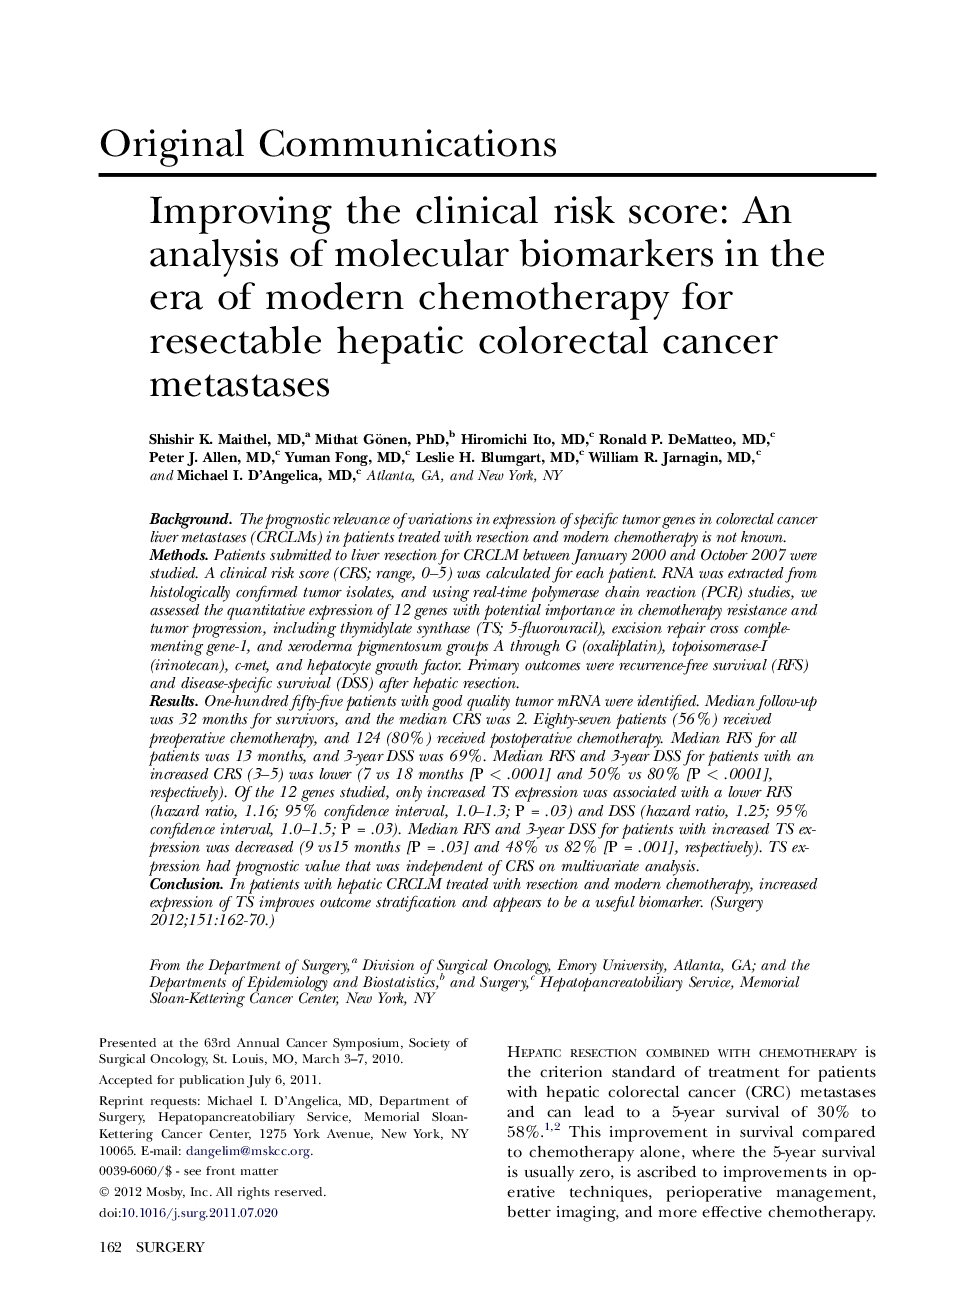 Improving the clinical risk score: An analysis of molecular biomarkers in the era of modern chemotherapy for resectable hepatic colorectal cancer metastases